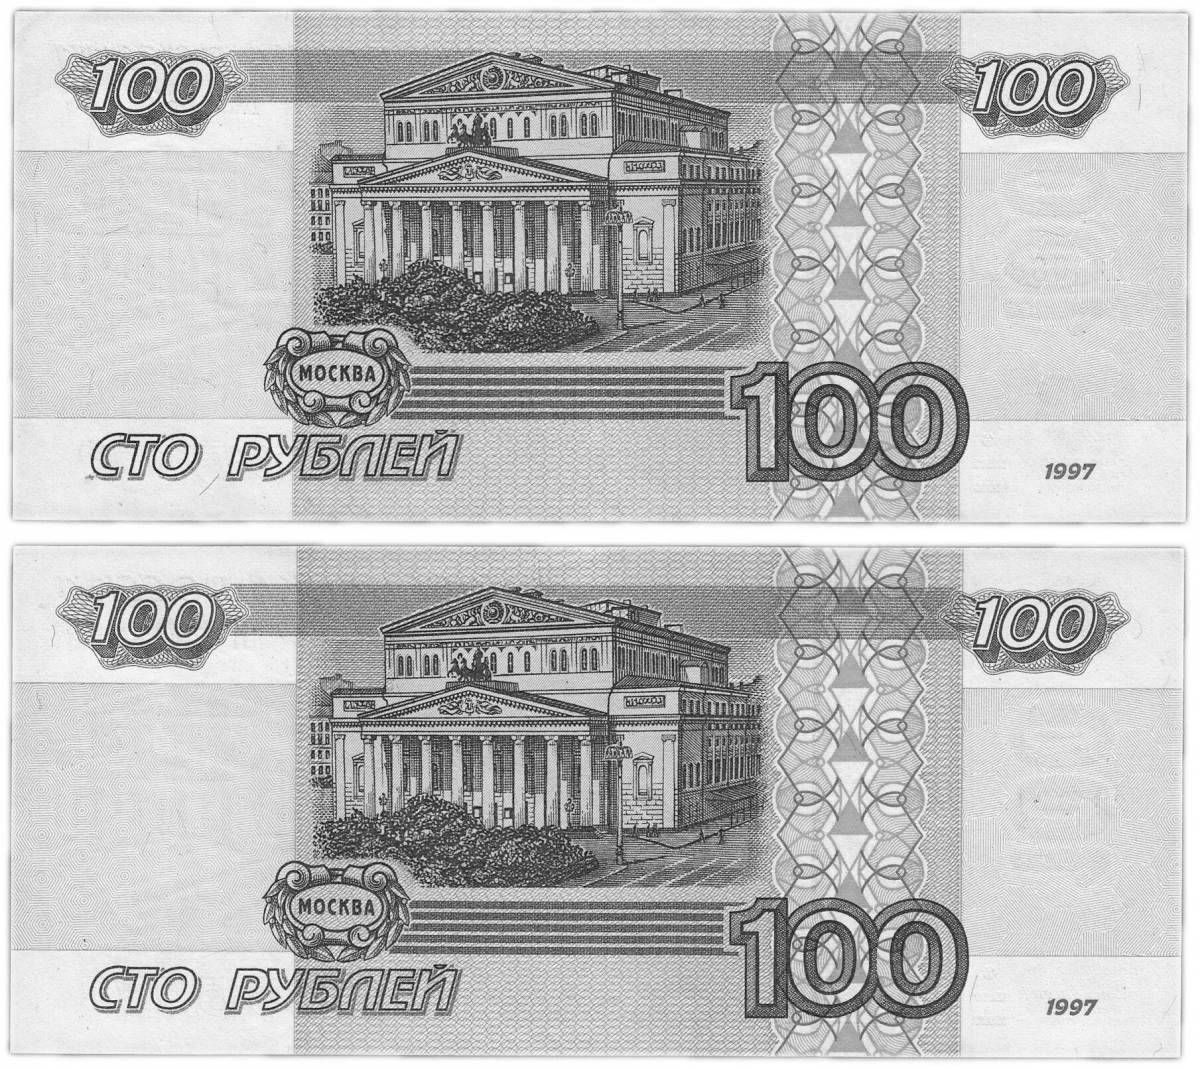 100 rubles #17